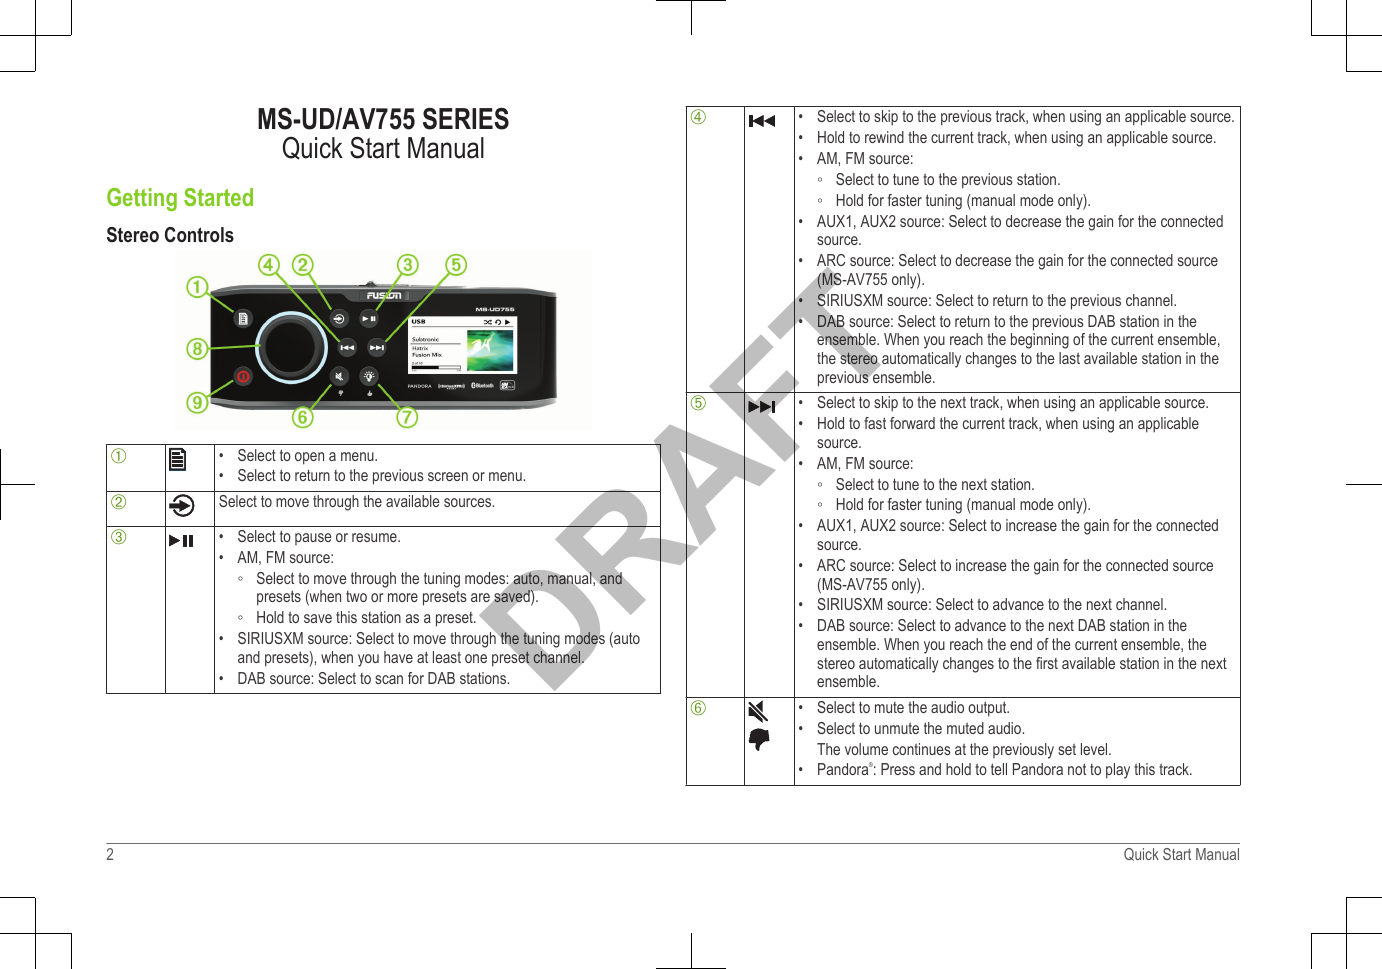 MS-UD/AV755 SERIESQuick Start ManualGetting StartedStereo ControlsÀ• Select to open a menu.•Select to return to the previous screen or menu.ÁSelect to move through the available sources.Â• Select to pause or resume.•AM, FM source:◦ Select to move through the tuning modes: auto, manual, andpresets (when two or more presets are saved).◦ Hold to save this station as a preset.• SIRIUSXM source: Select to move through the tuning modes (autoand presets), when you have at least one preset channel.• DAB source: Select to scan for DAB stations.Ã• Select to skip to the previous track, when using an applicable source.•Hold to rewind the current track, when using an applicable source.• AM, FM source:◦ Select to tune to the previous station.◦ Hold for faster tuning (manual mode only).• AUX1, AUX2 source: Select to decrease the gain for the connectedsource.• ARC source: Select to decrease the gain for the connected source(MS-AV755 only).• SIRIUSXM source: Select to return to the previous channel.• DAB source: Select to return to the previous DAB station in theensemble. When you reach the beginning of the current ensemble,the stereo automatically changes to the last available station in theprevious ensemble.Ä• Select to skip to the next track, when using an applicable source.•Hold to fast forward the current track, when using an applicablesource.• AM, FM source:◦ Select to tune to the next station.◦ Hold for faster tuning (manual mode only).• AUX1, AUX2 source: Select to increase the gain for the connectedsource.• ARC source: Select to increase the gain for the connected source(MS-AV755 only).• SIRIUSXM source: Select to advance to the next channel.• DAB source: Select to advance to the next DAB station in theensemble. When you reach the end of the current ensemble, thestereo automatically changes to the first available station in the nextensemble.Å• Select to mute the audio output.•Select to unmute the muted audio.The volume continues at the previously set level.• Pandora®: Press and hold to tell Pandora not to play this track.2 Quick Start ManualDRAFT